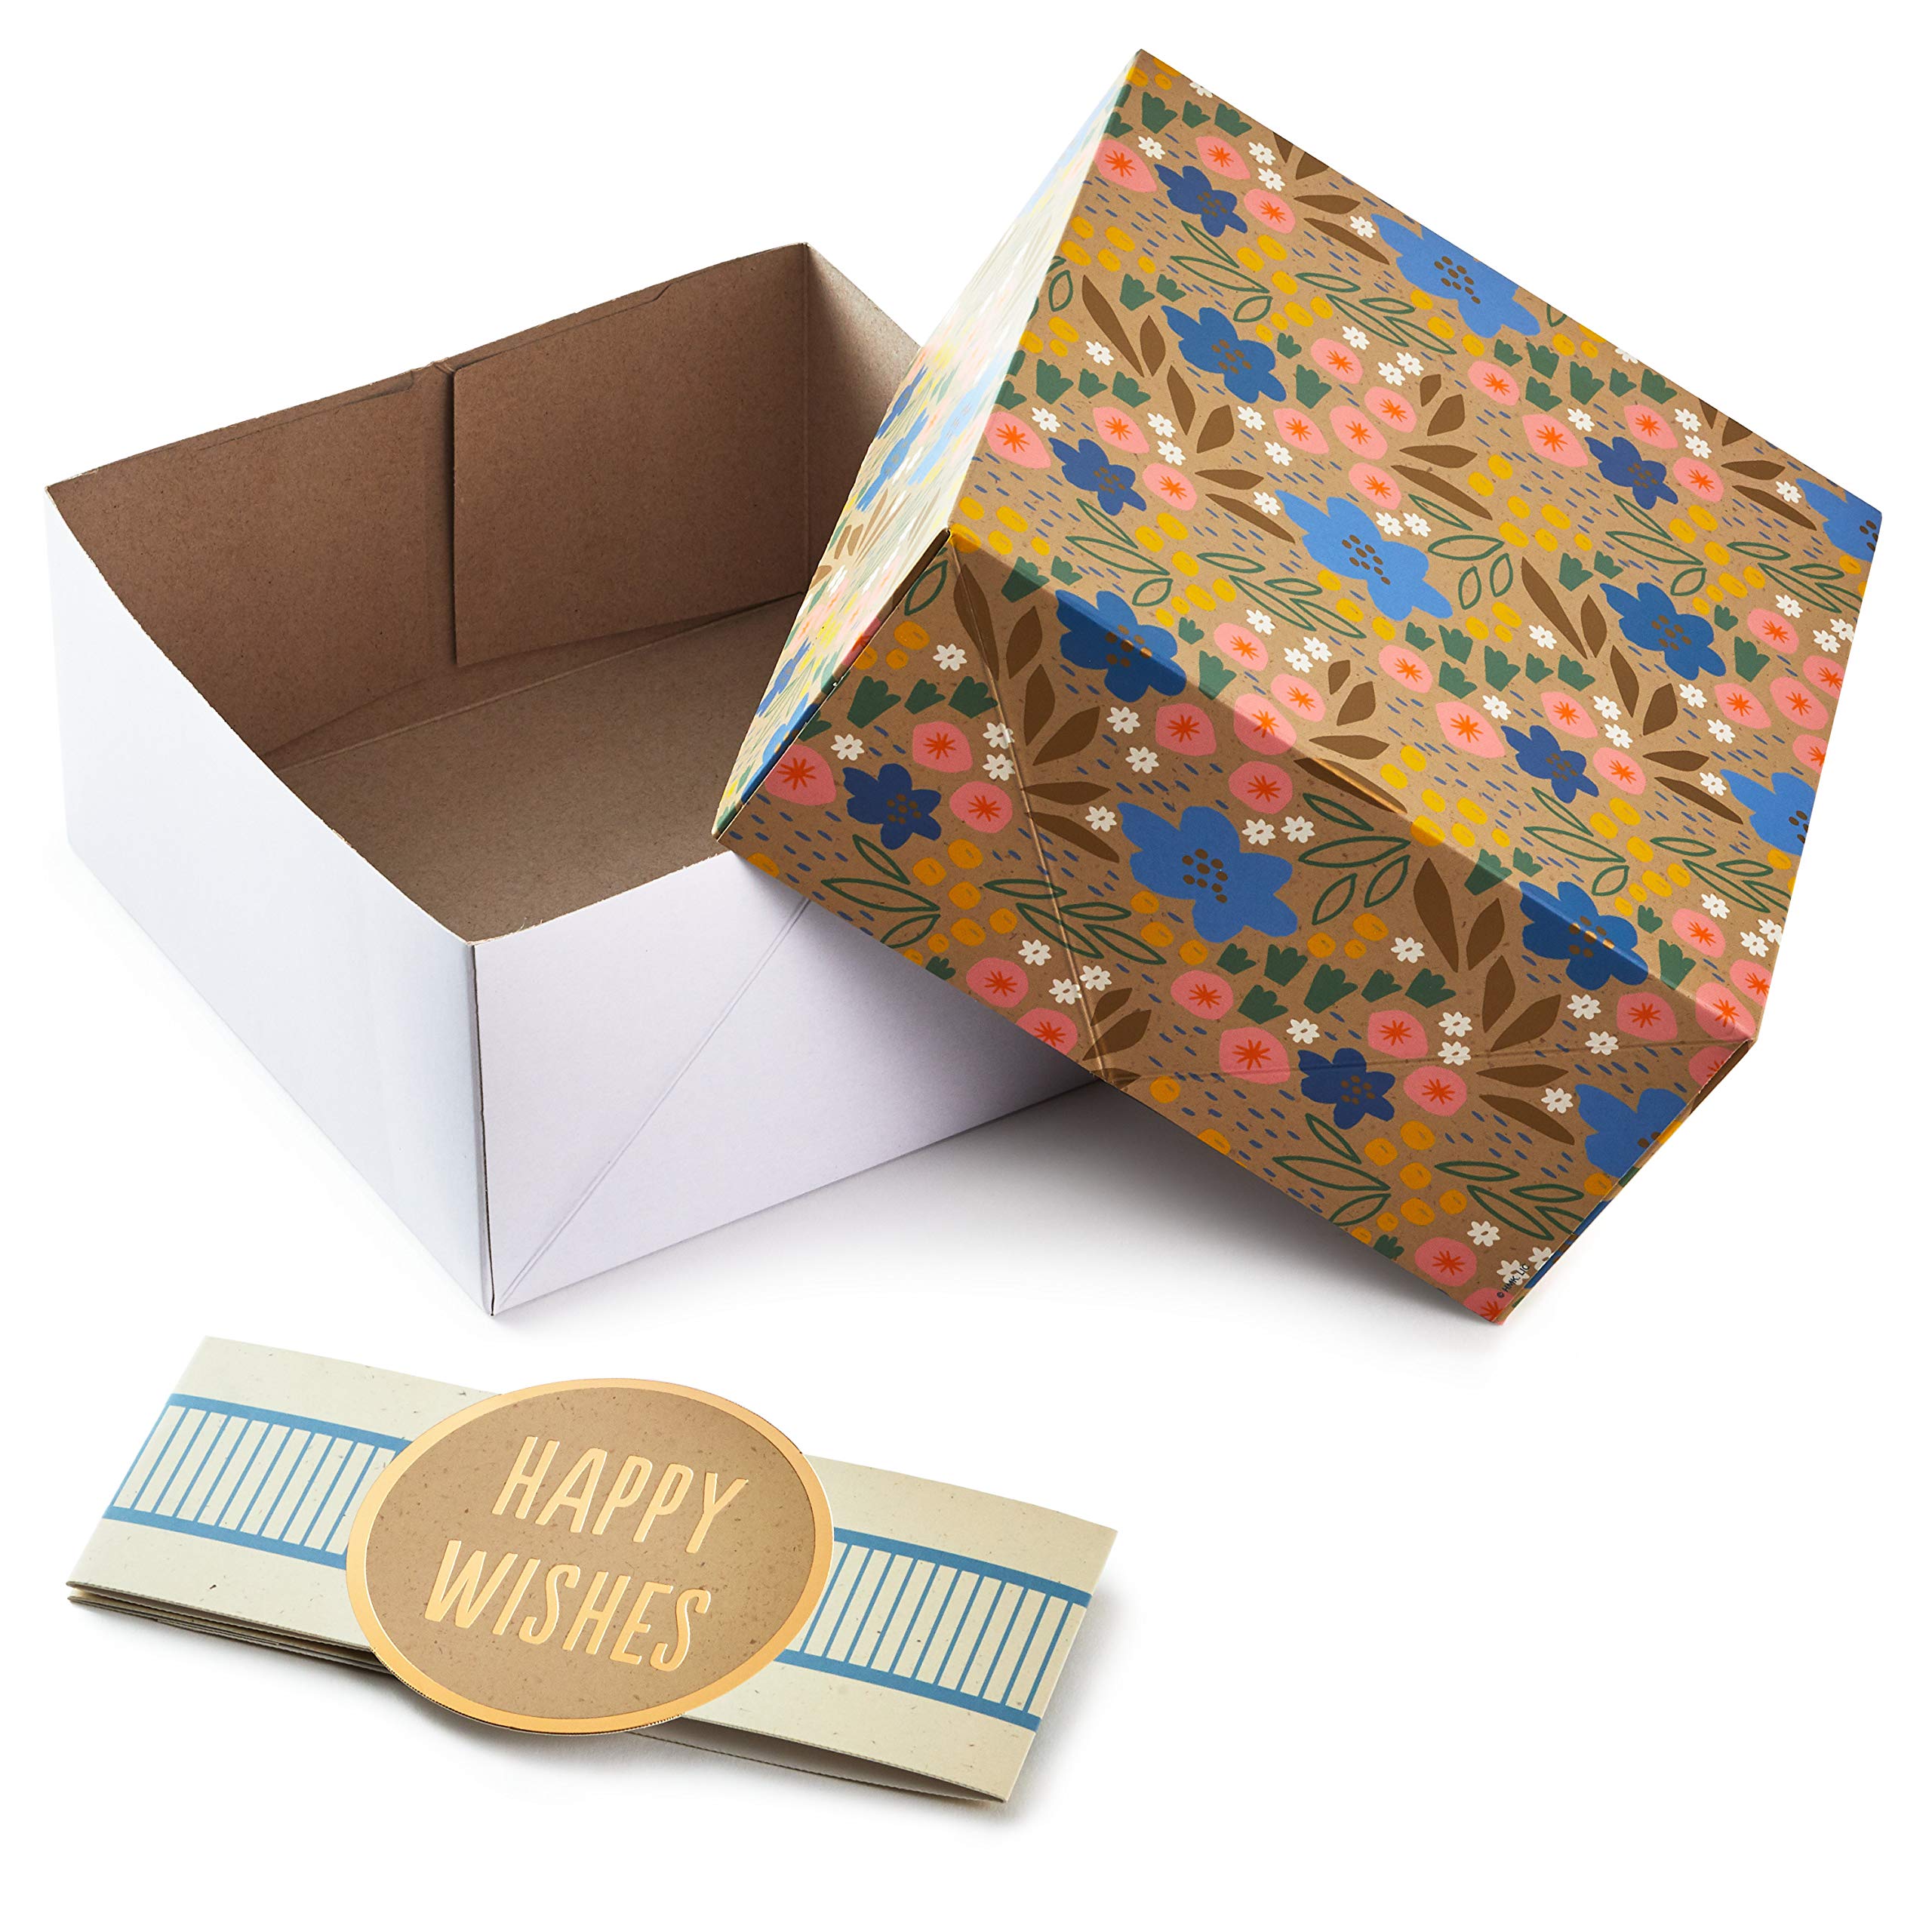 Hallmark Gift Boxes with Wrap Bands, Assorted Sizes (3-Pack: Cute Flowers and Stripes) for Birthdays, Bridal Showers, Mother's Day, Best Friends